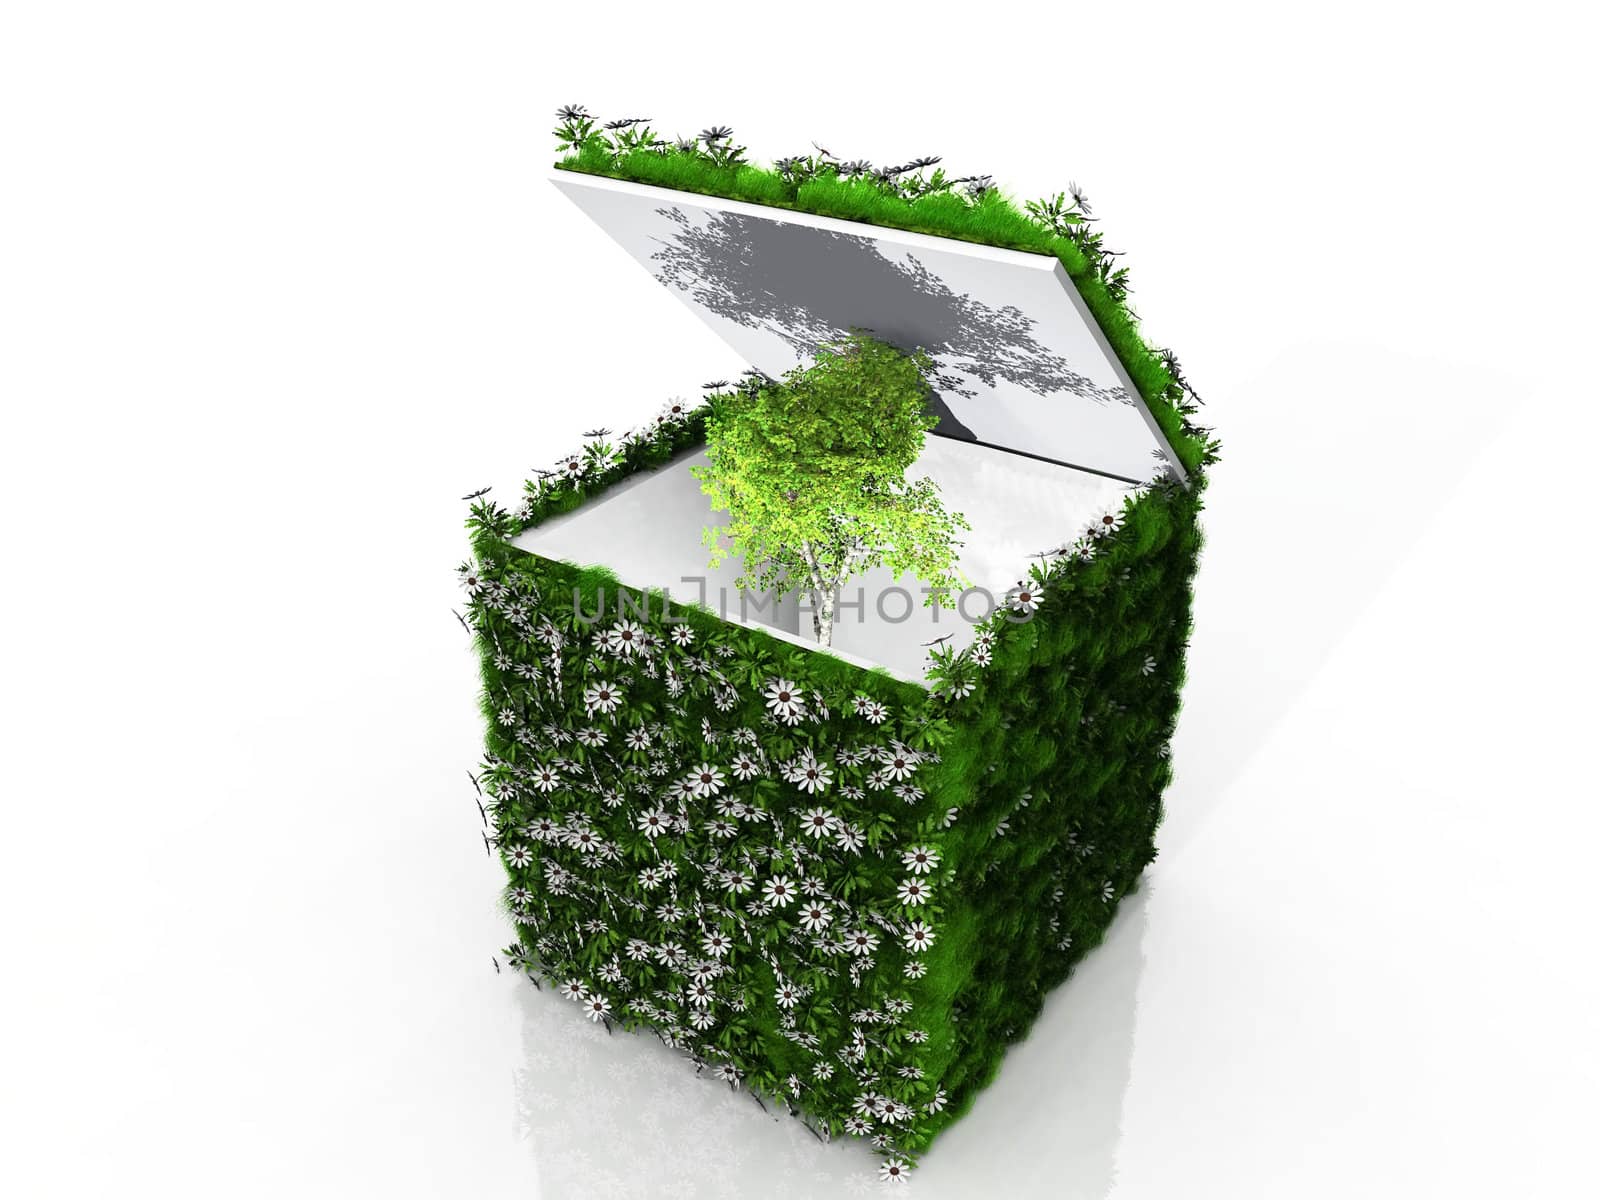 cube with grass flowers and tree